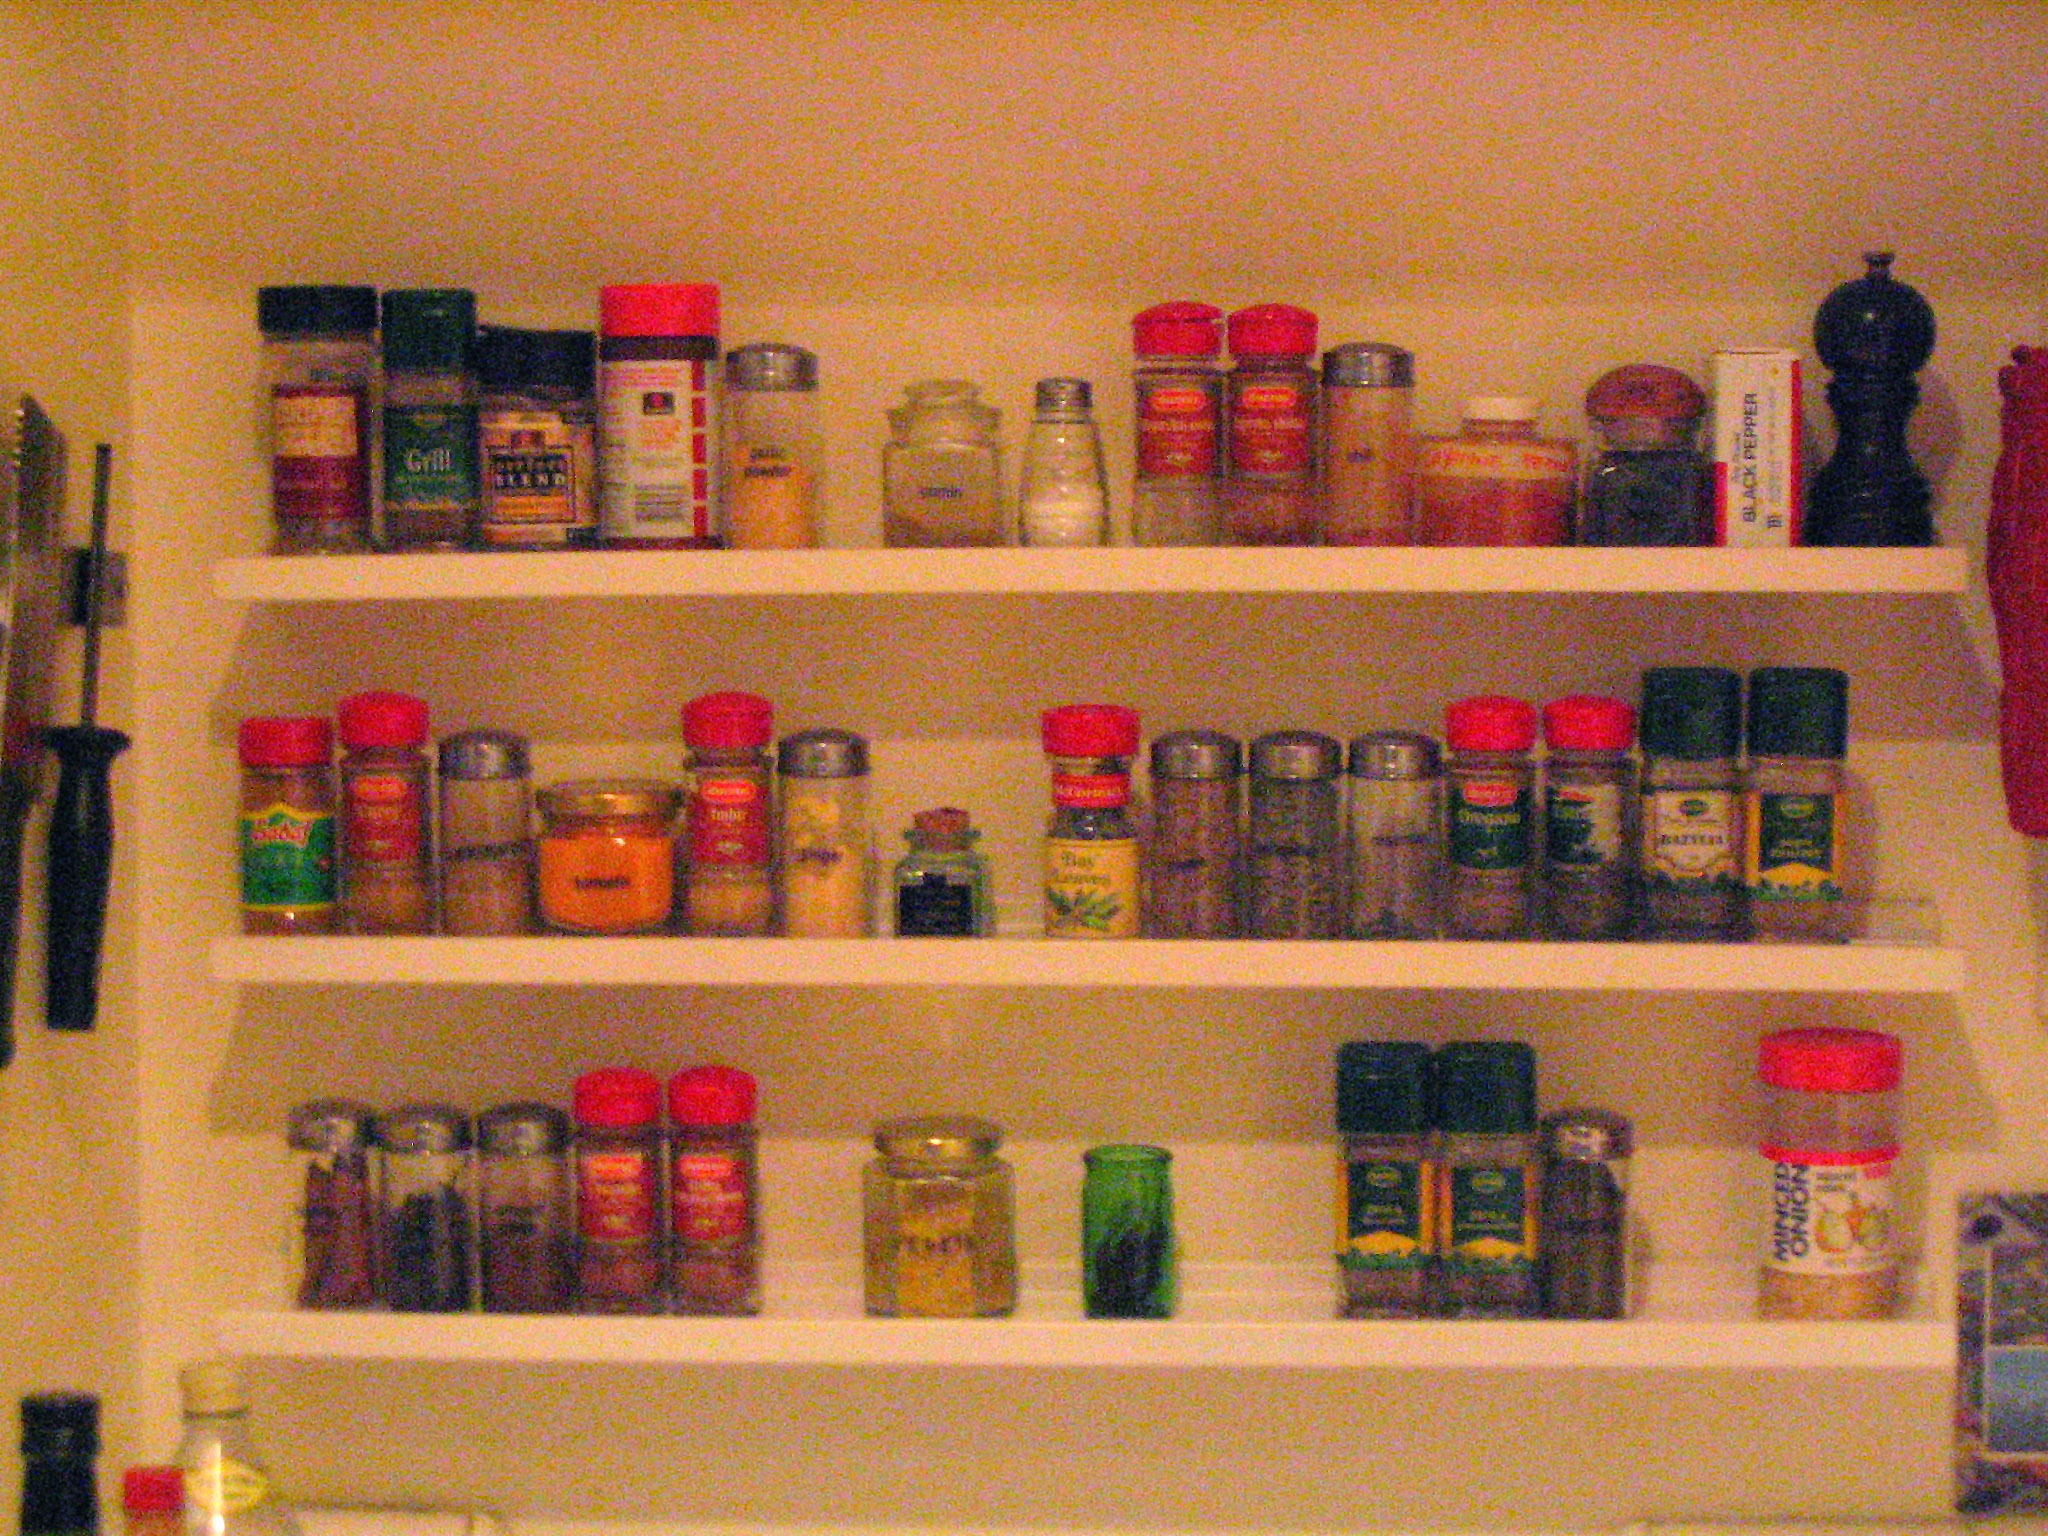 the shelves are filled with different types of spices